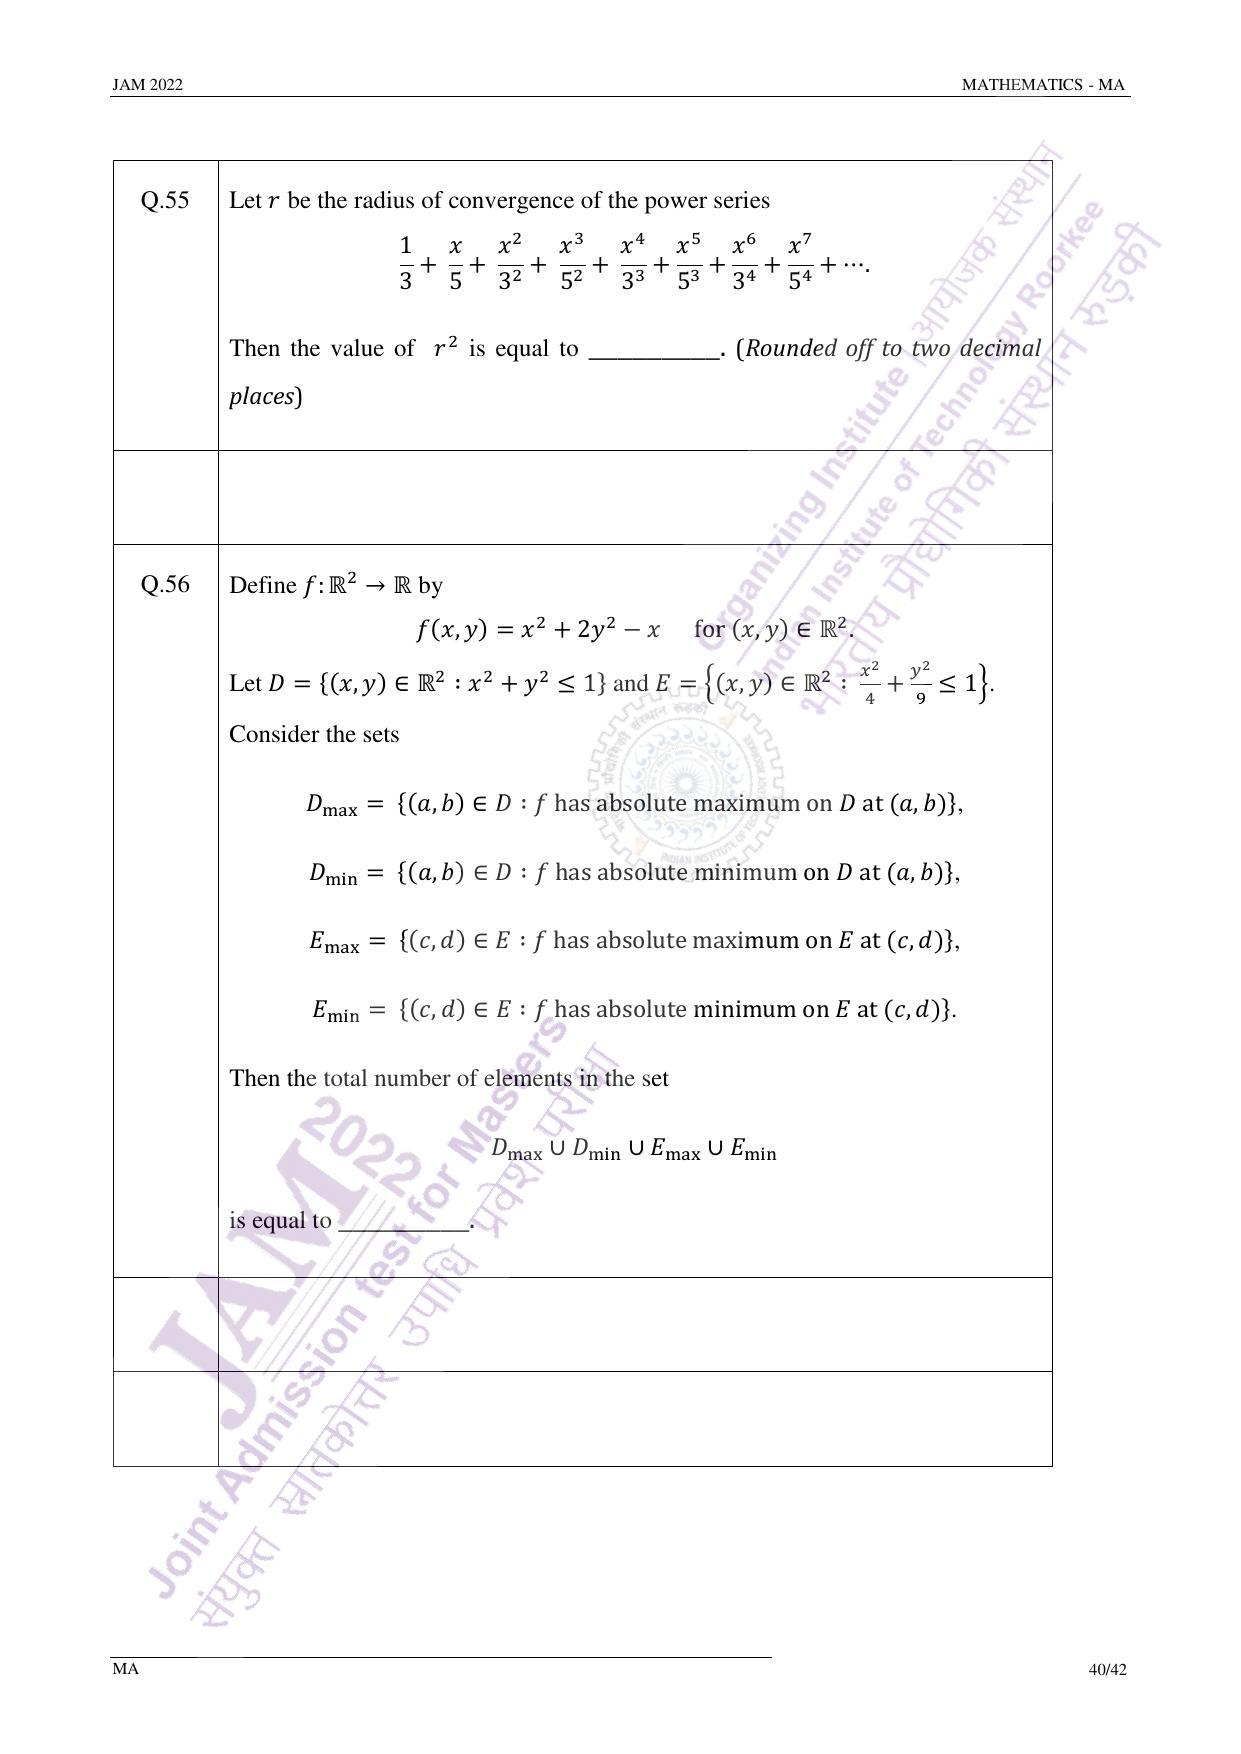 JAM 2022: MA Question Paper - Page 40